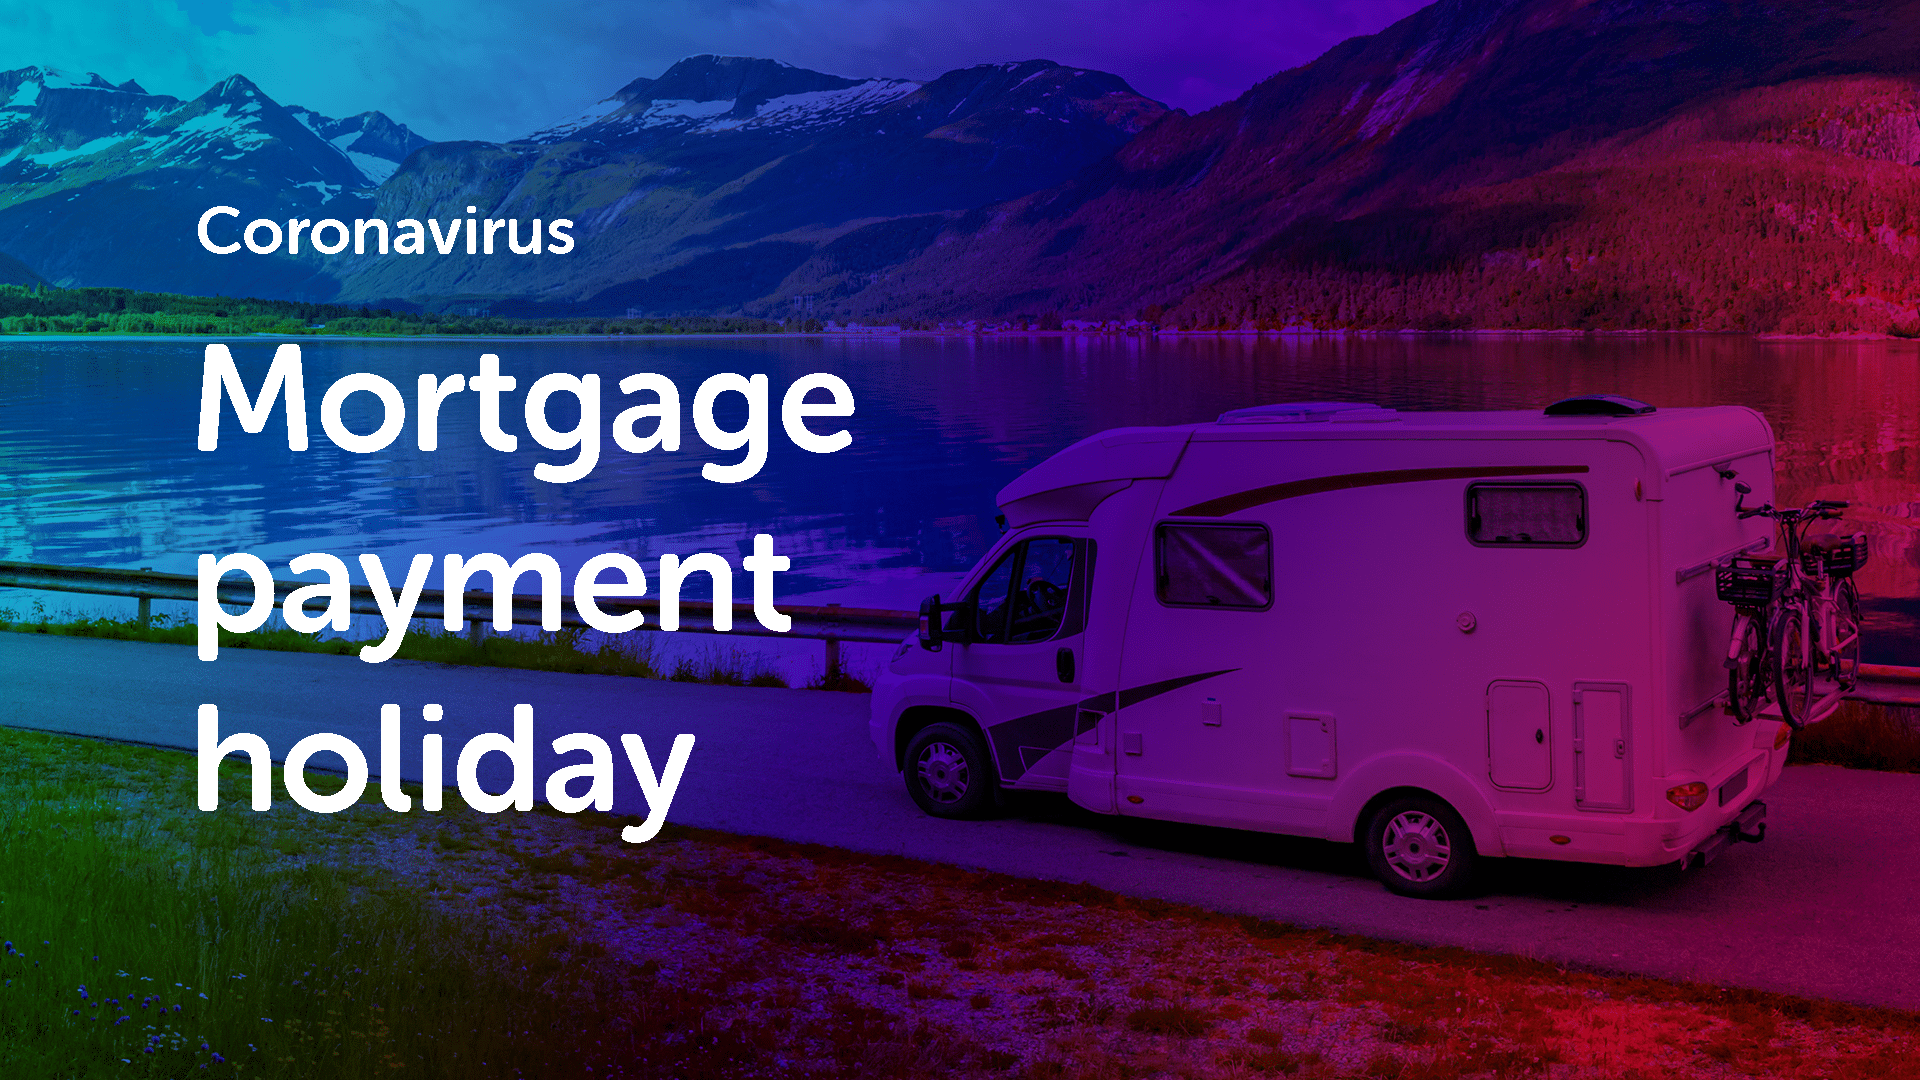 Mortgage Payment Holidays